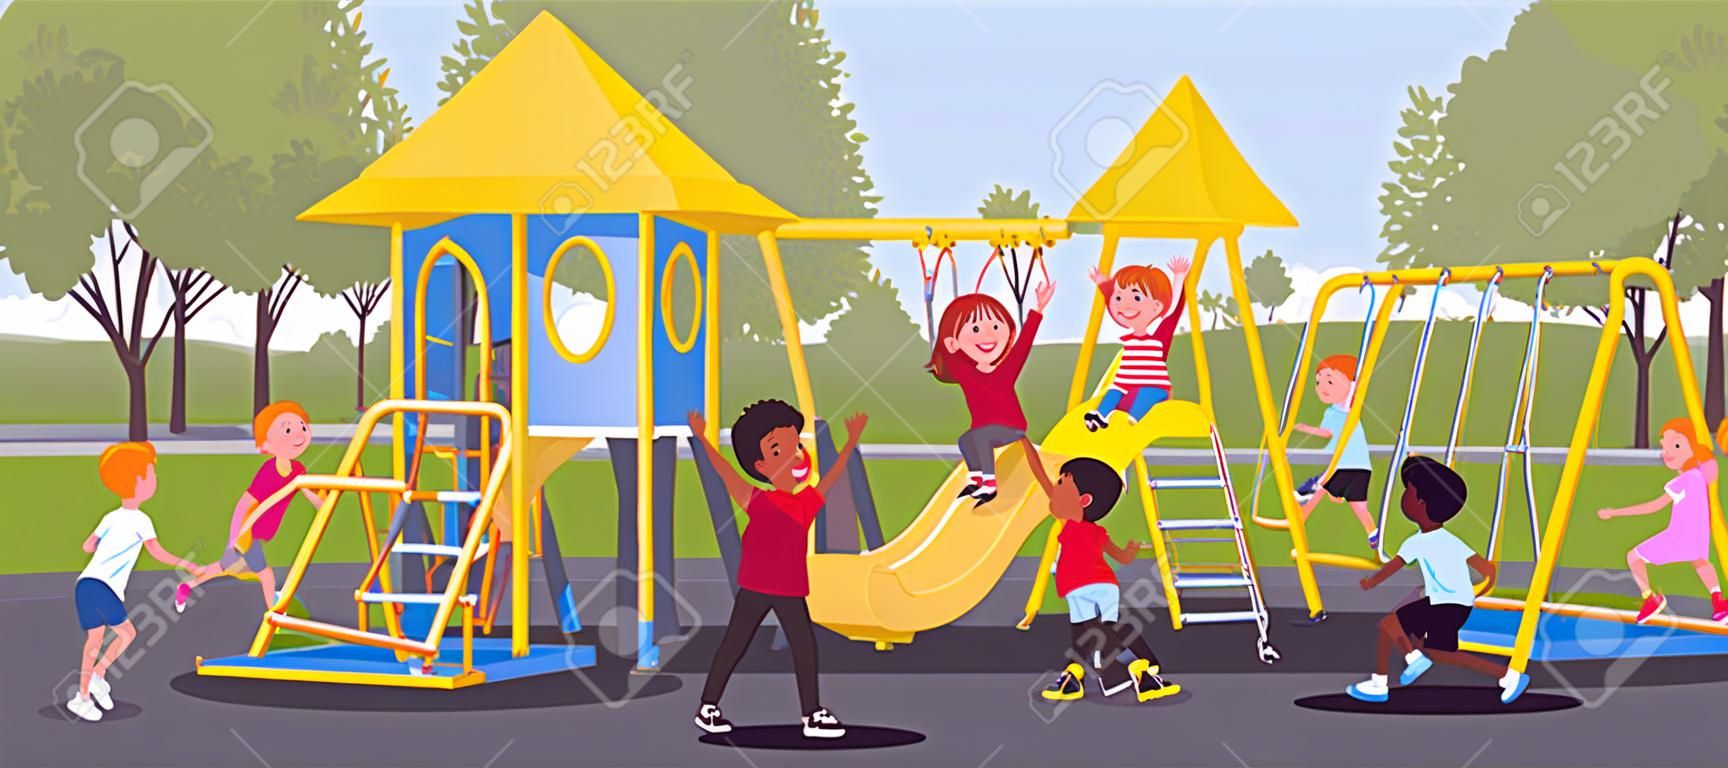 Happy kids playing in playground, leisure outside. Excited boys and girls, active children share fun with friends, outdoor bright park equipment for recreation. Vector flat style cartoon illustration